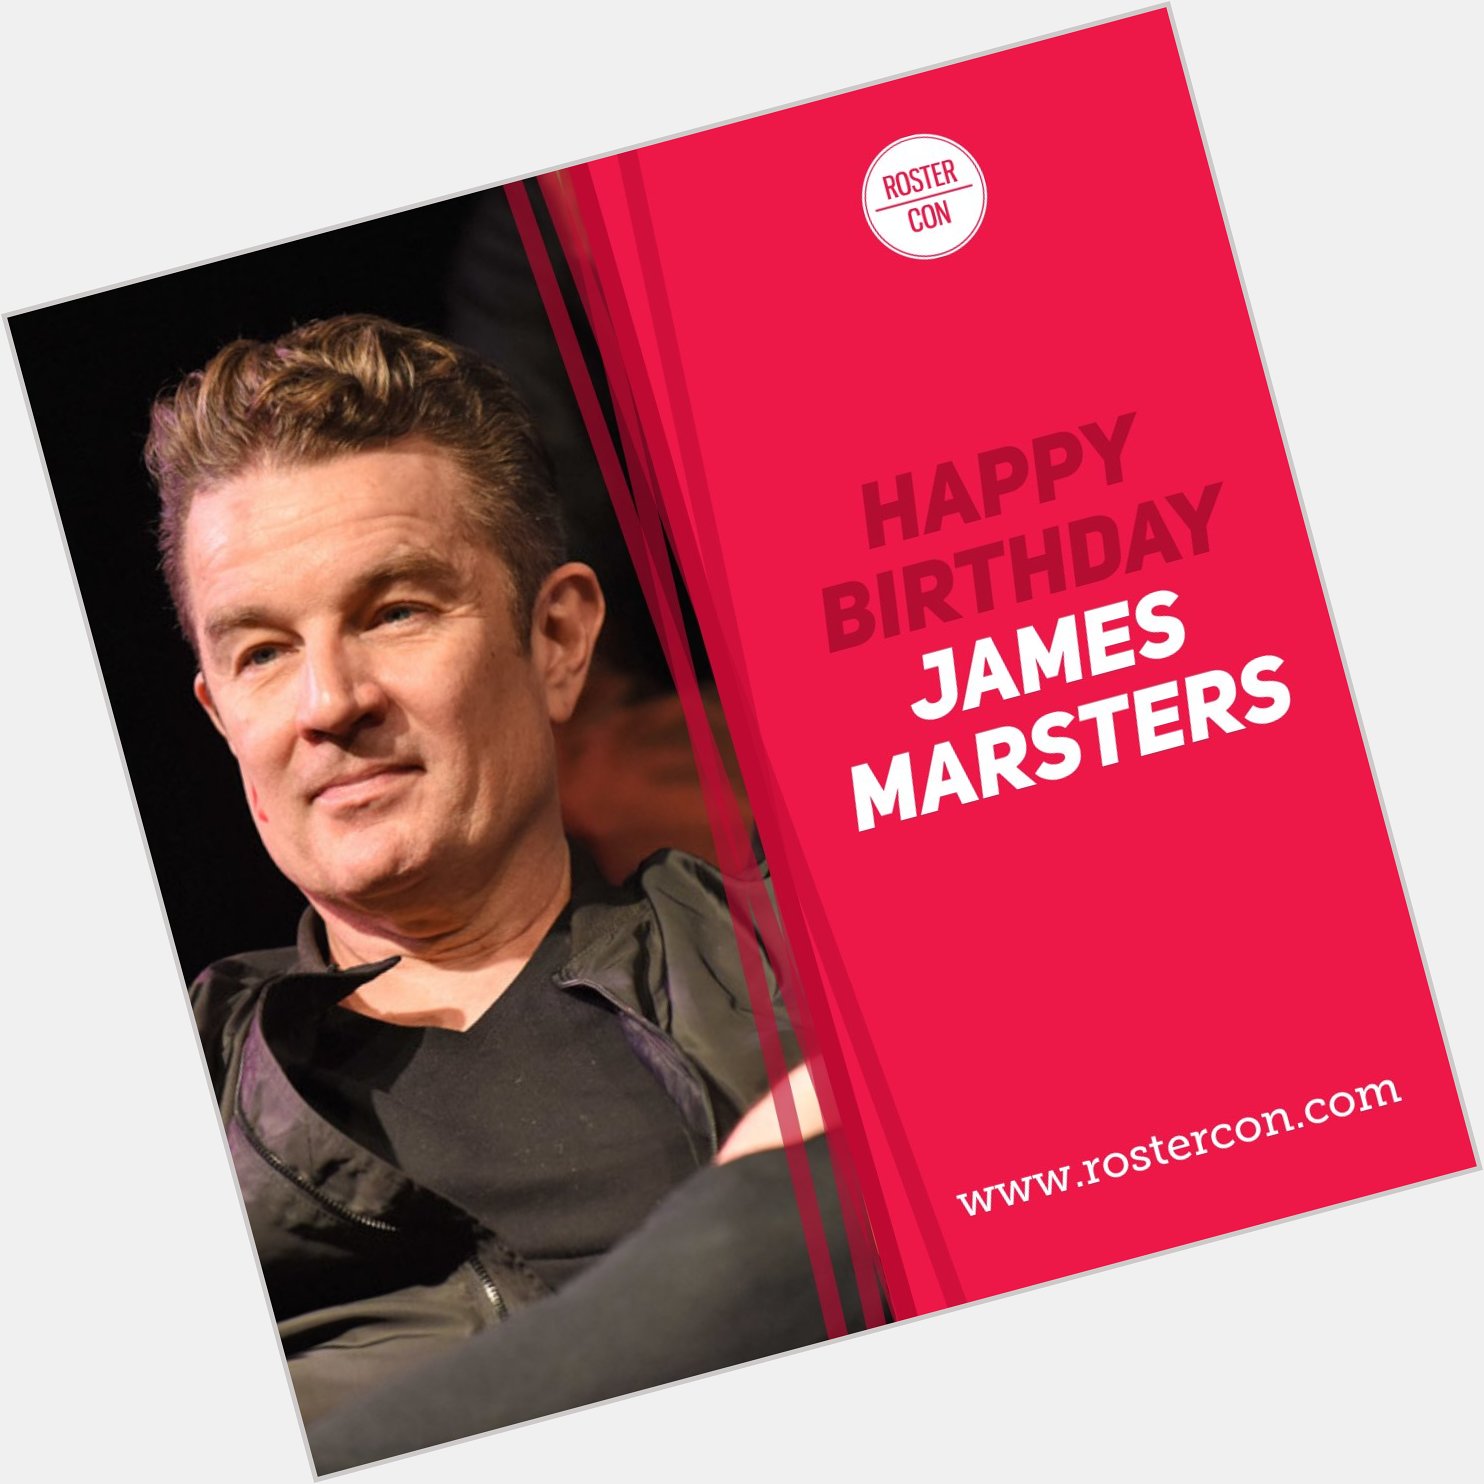  Happy Birthday James Marsters ! Souvenirs / Throwback :  